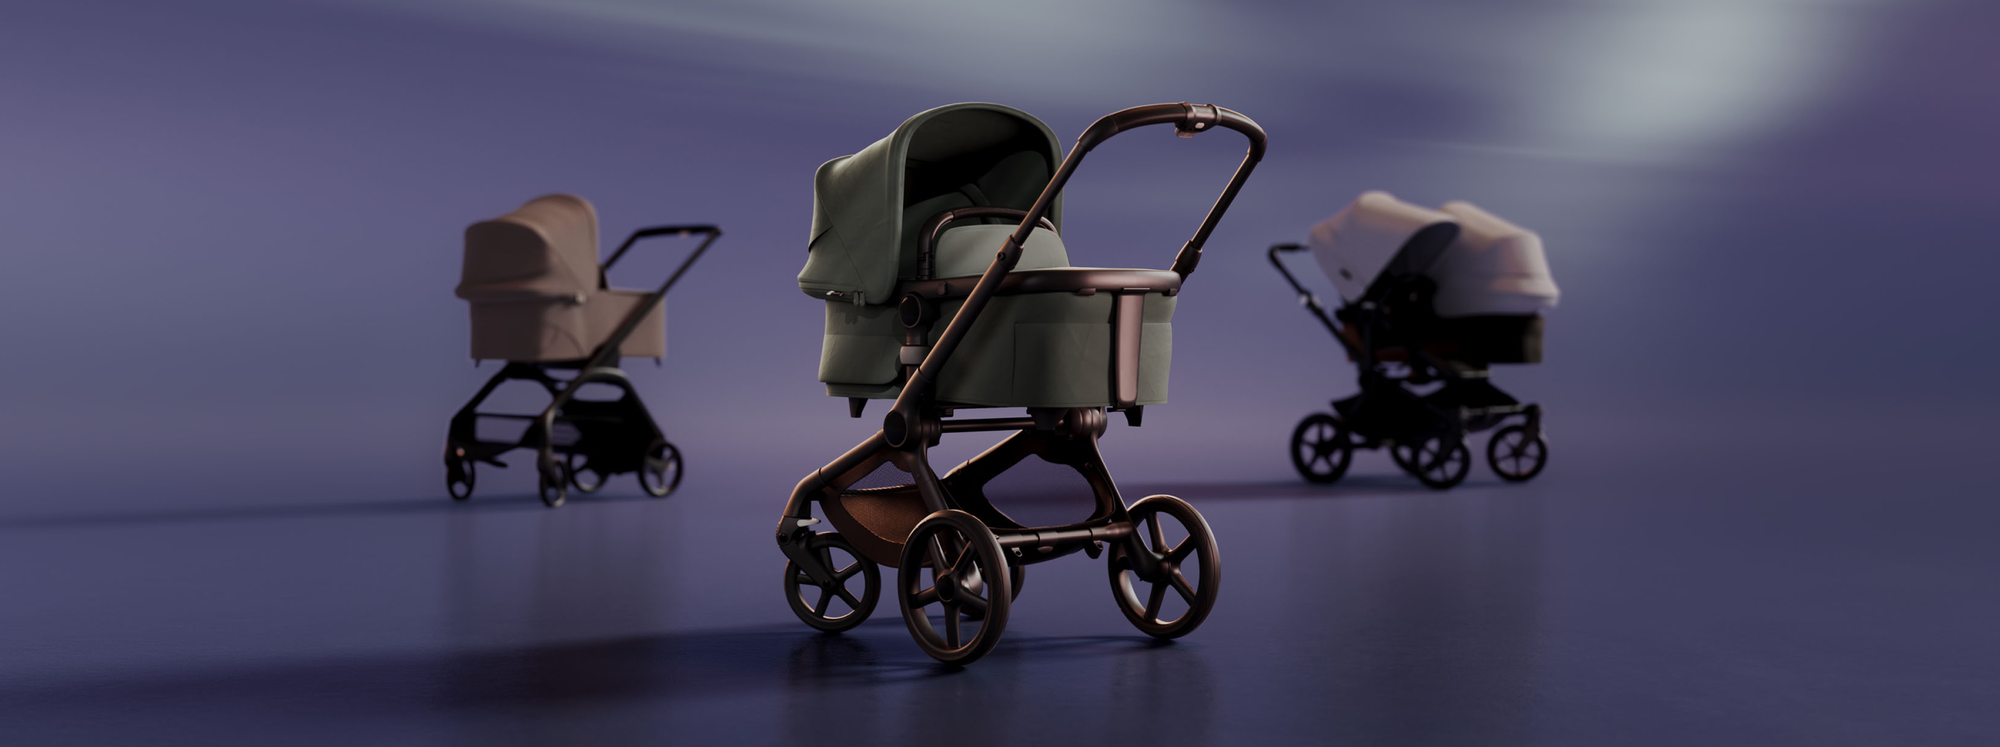 A lineup of 3 newborn prams. At the front is a Bugaboo Fox 5 with Forest Green fabrics; further back are a Bugaboo Fox 5 with Dune Taupe fabrics and a Bugaboo Donkey 5 Duo with Misty White sun canopy.